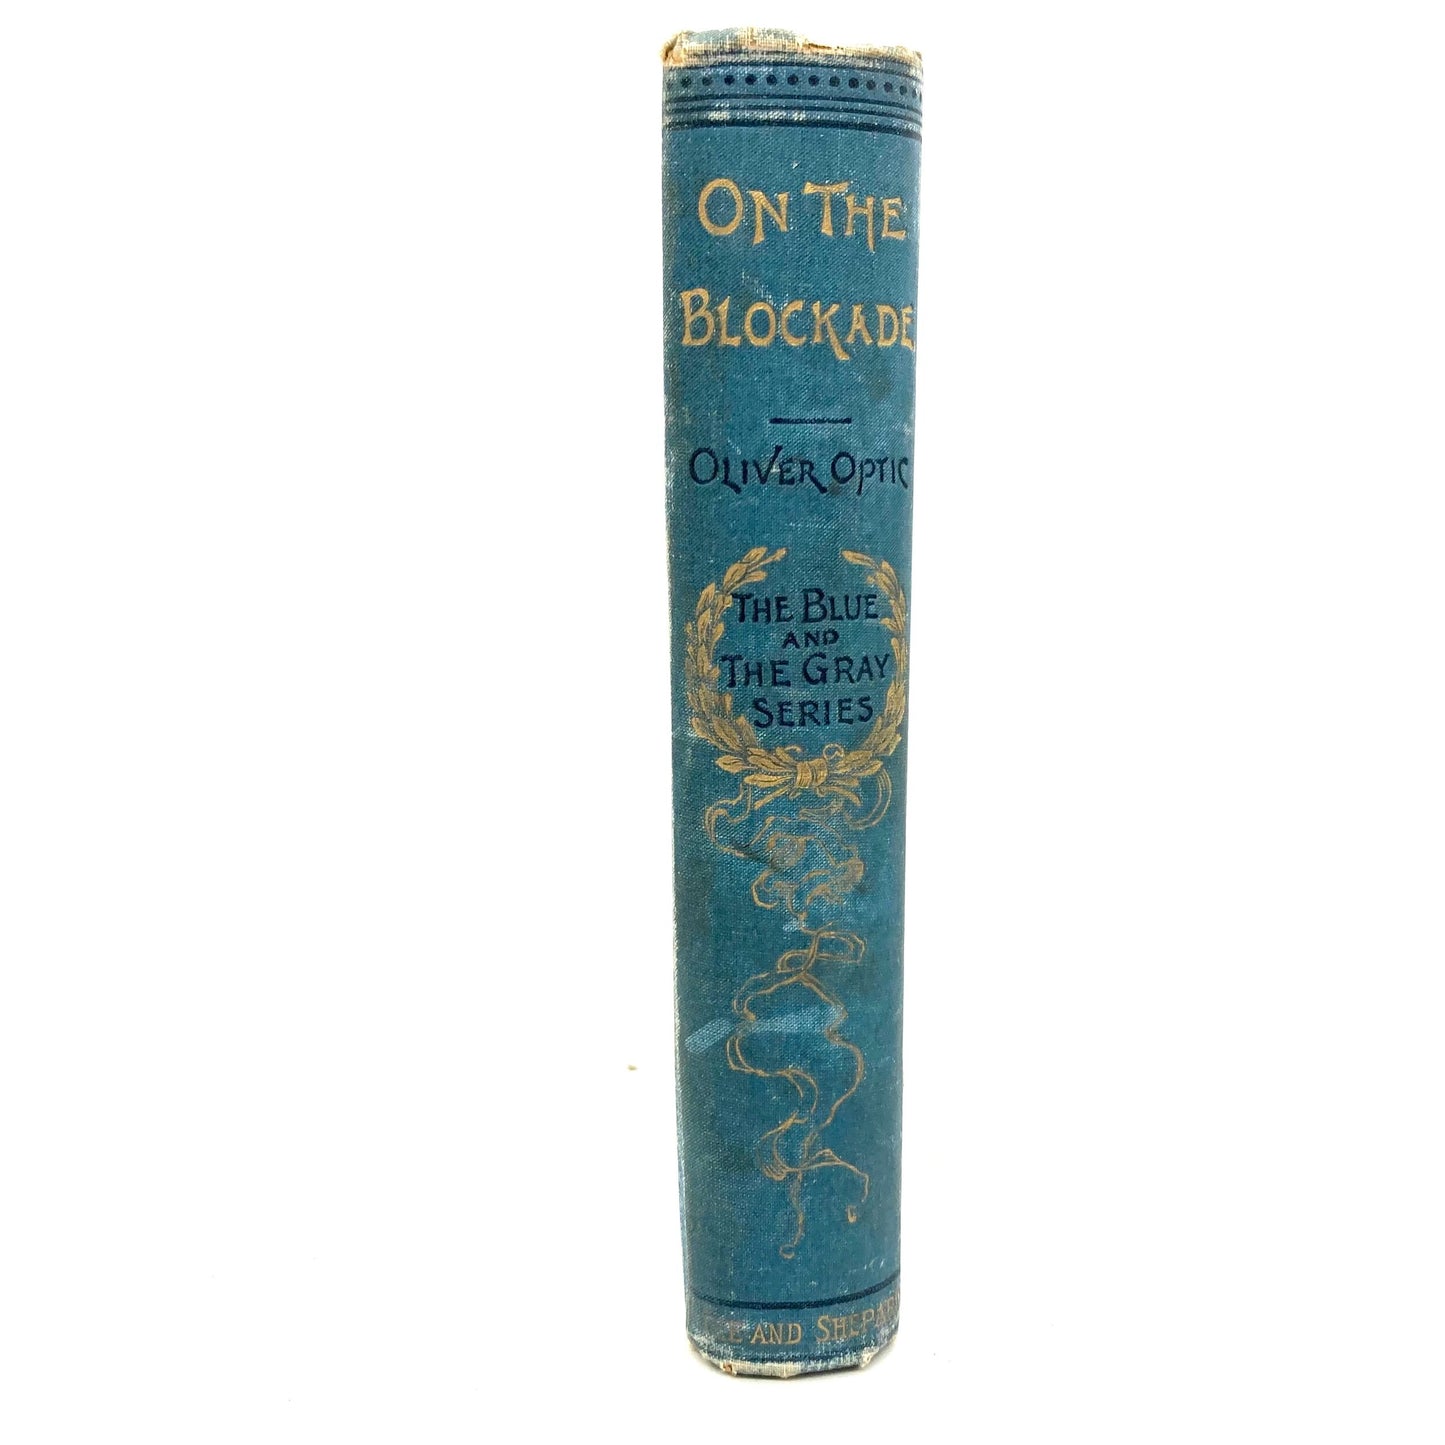 OPTIC, Oliver "On the Blockade" [Lee and Shepard, 1893] - Buzz Bookstore